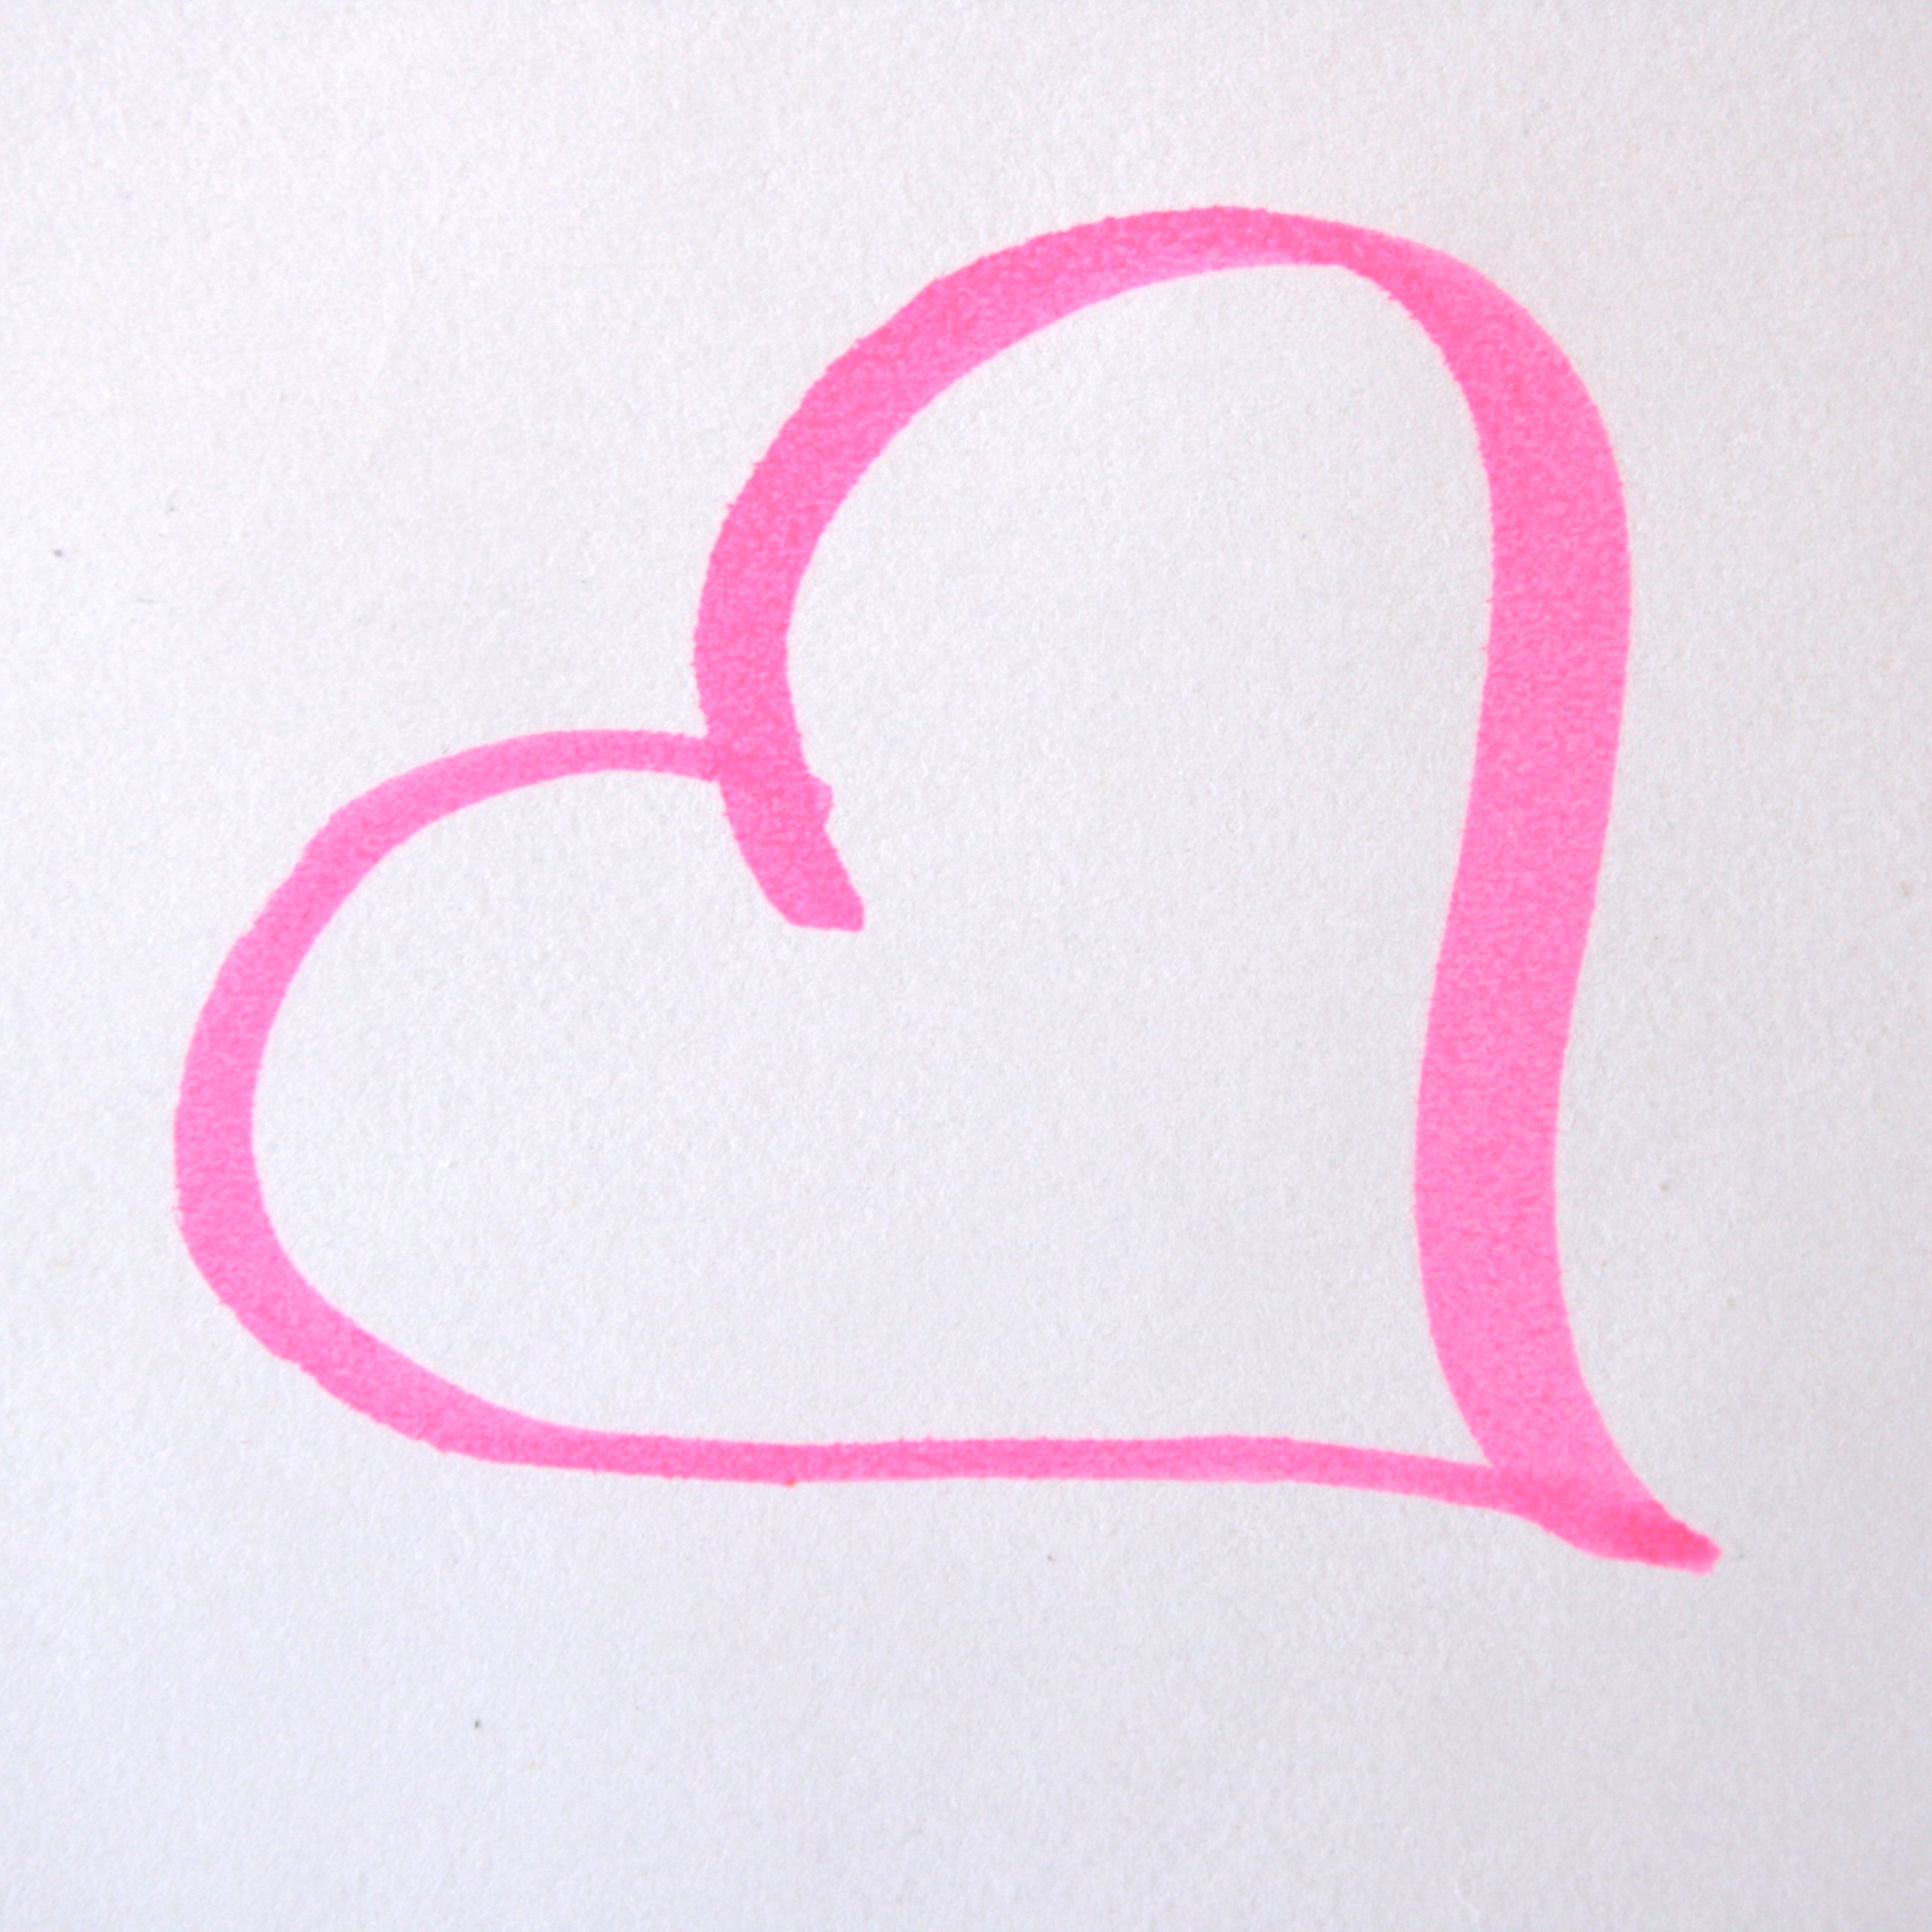 Heart Drawn In Pink Magic Marker Picture   Free Photograph   Photos